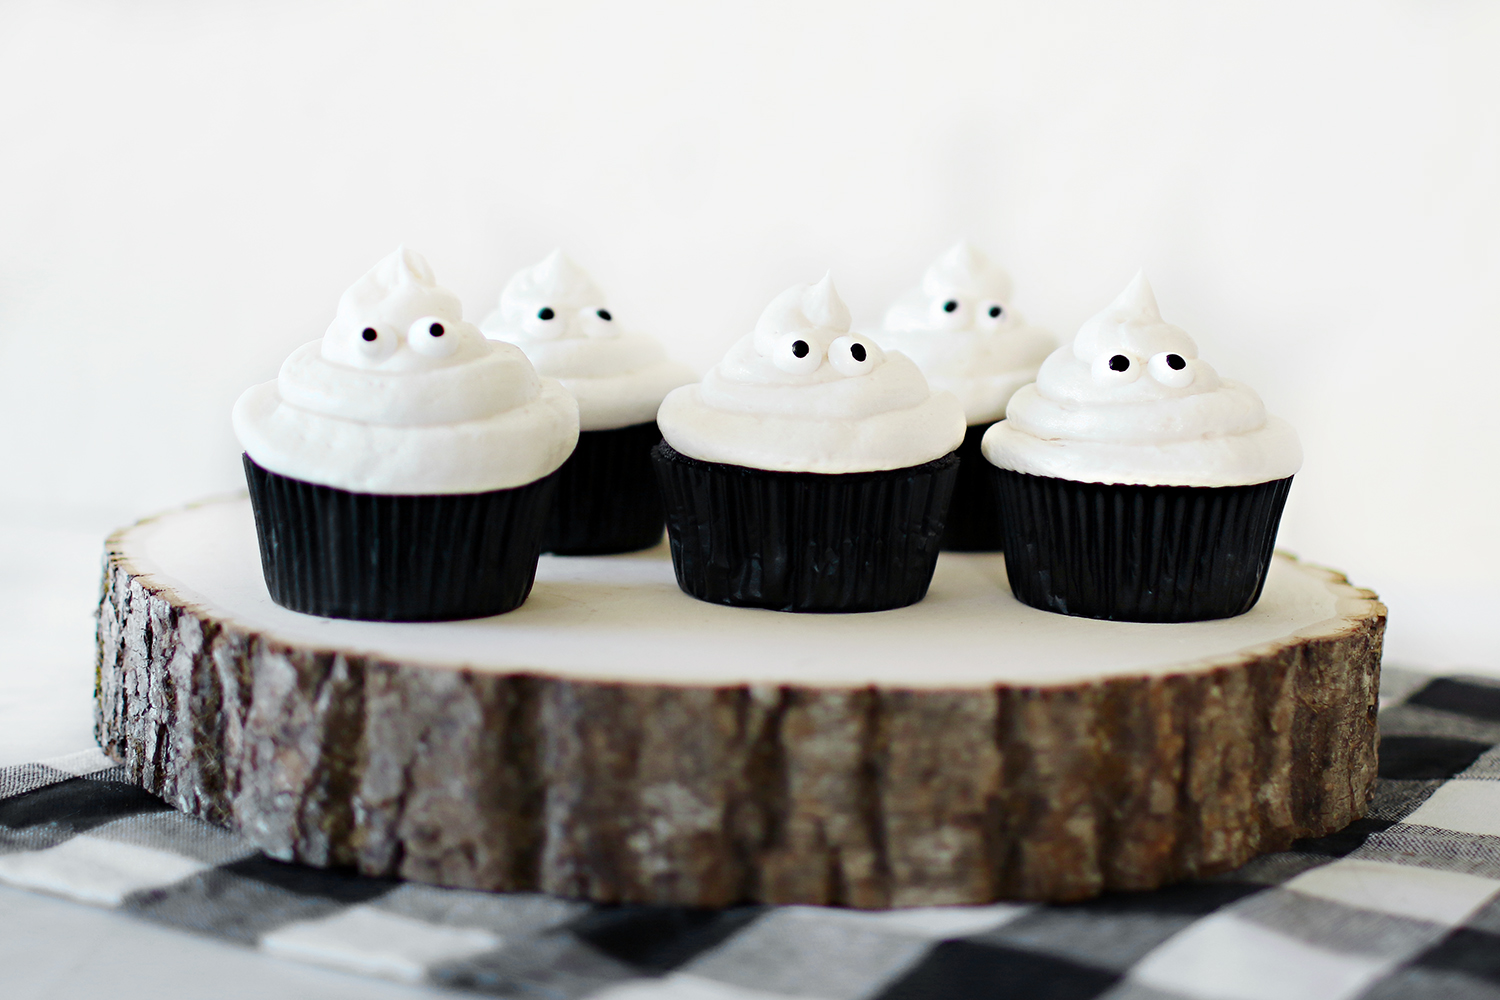 Black velvet and vanilla butter cream ghost cupcakes that our family loves to make for the Halloween festivities. Simple recipes and easy decorating make these cupcakes a hit for anyone who gets to make them. They are also delicious for all who get to enjoy them. Catch the entire recipe for our Ghost in the Graveyard cupcakes over at Haus of Layne! #HalloweenFood #HalloweenRecipe #HalloweenFoodIdeas #HalloweenTreats #Cupcakes #CupcakeRecipe #ButtercreamFrosting #BlackVelvetCake